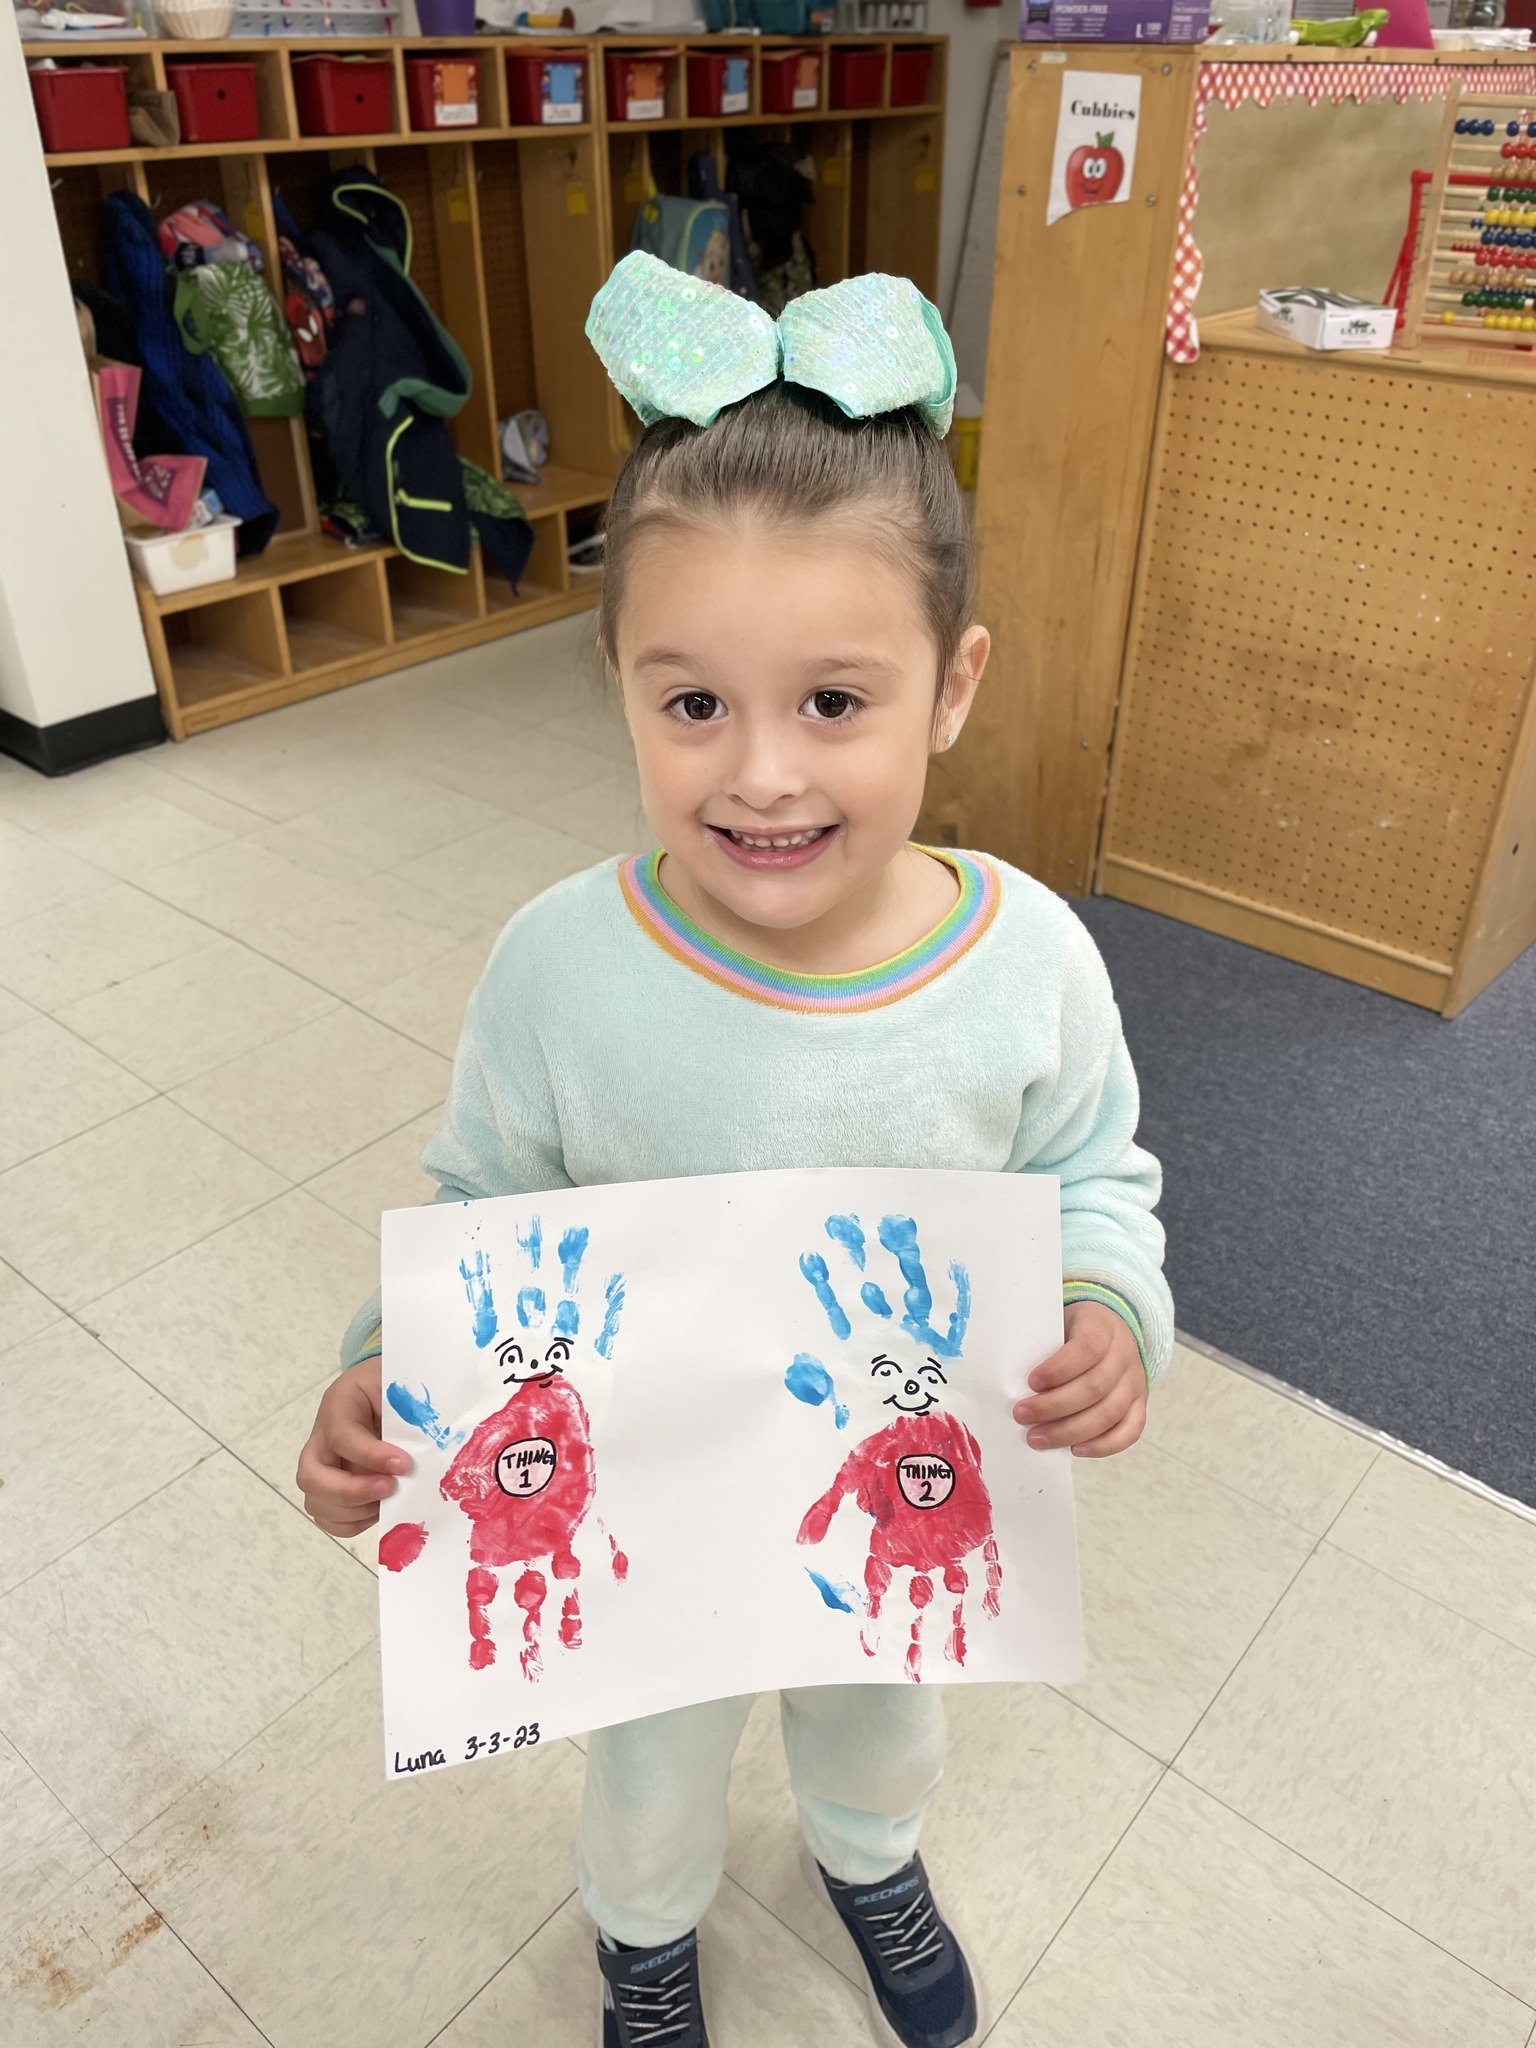  Ms. Centeno reported, "Lincoln 3 year old class Celebrated Dr. Seuss week by hand painting Thing 1 and Thing 2. " 